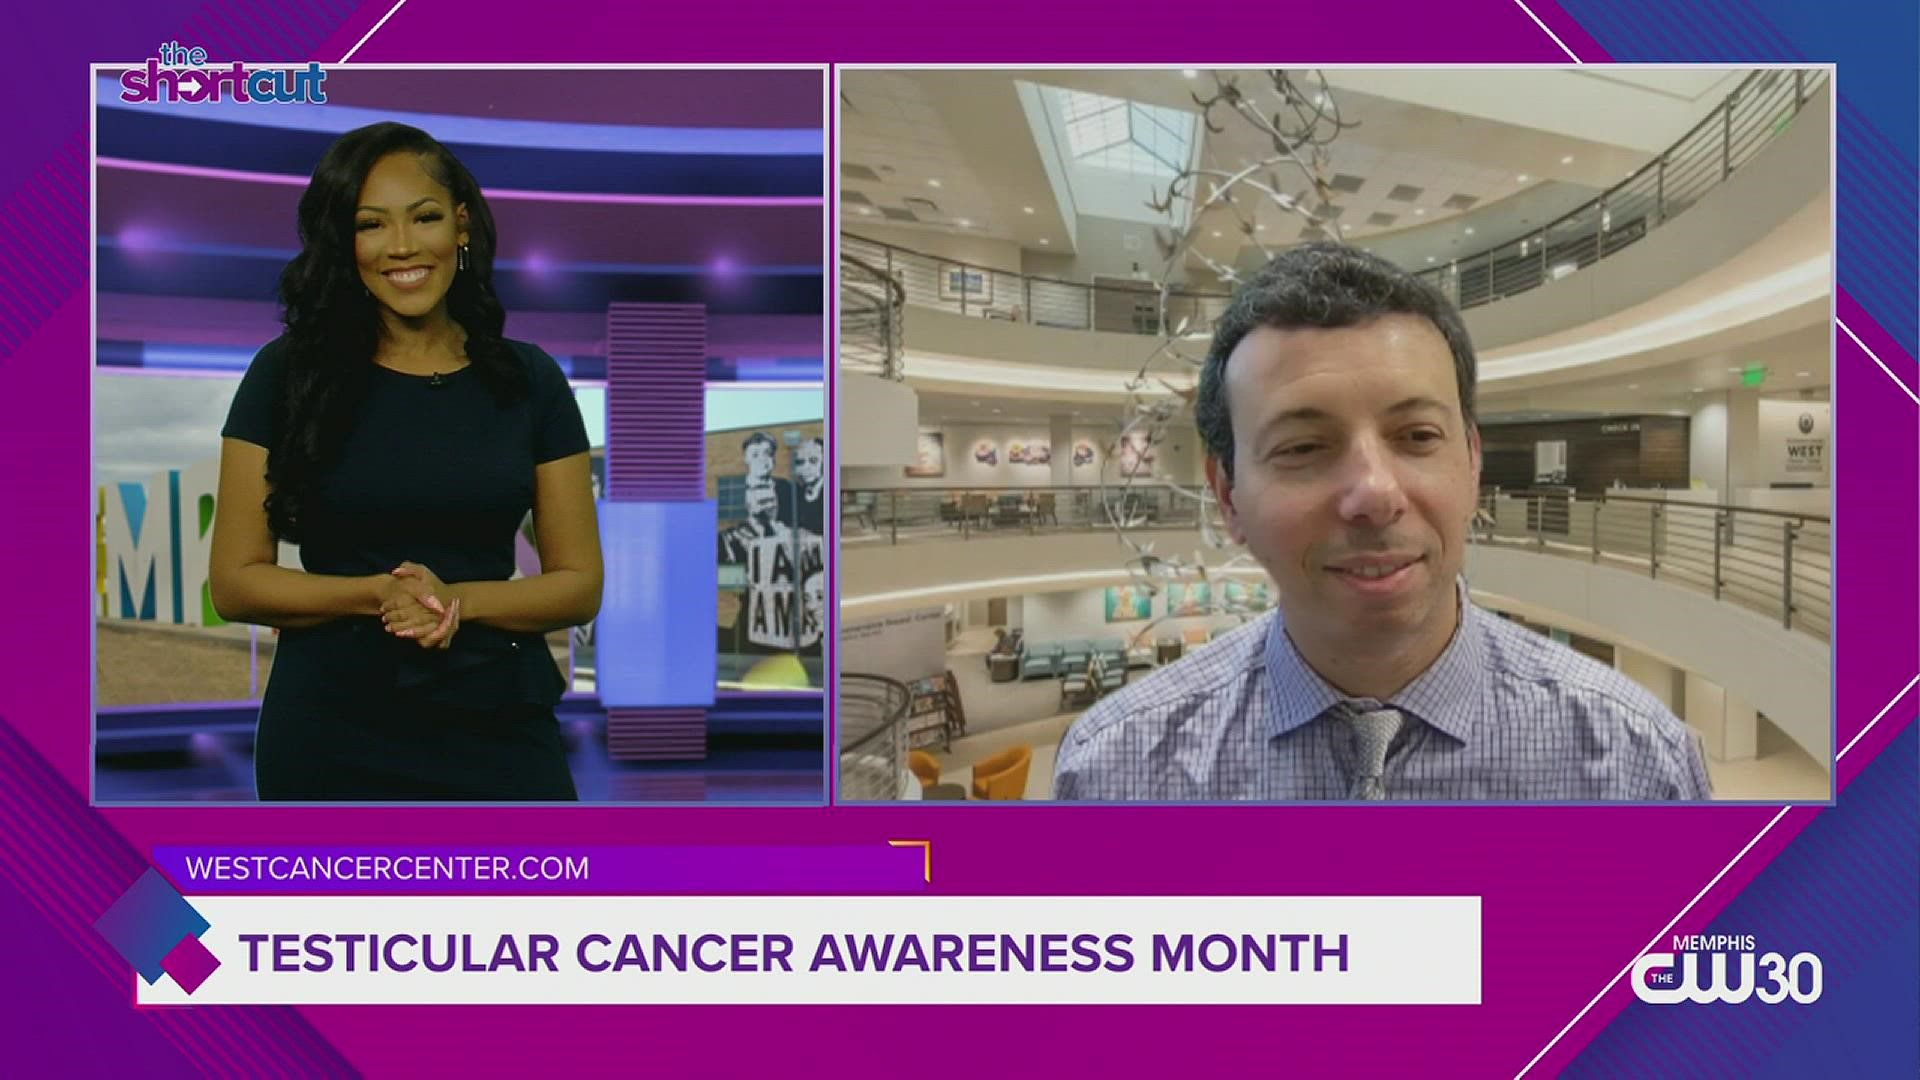 In honor of Testicular Cancer Awareness Month, learn more about signs and treatments for this rare, but curable disease from medical oncologist Dr. Daniel Vaena!